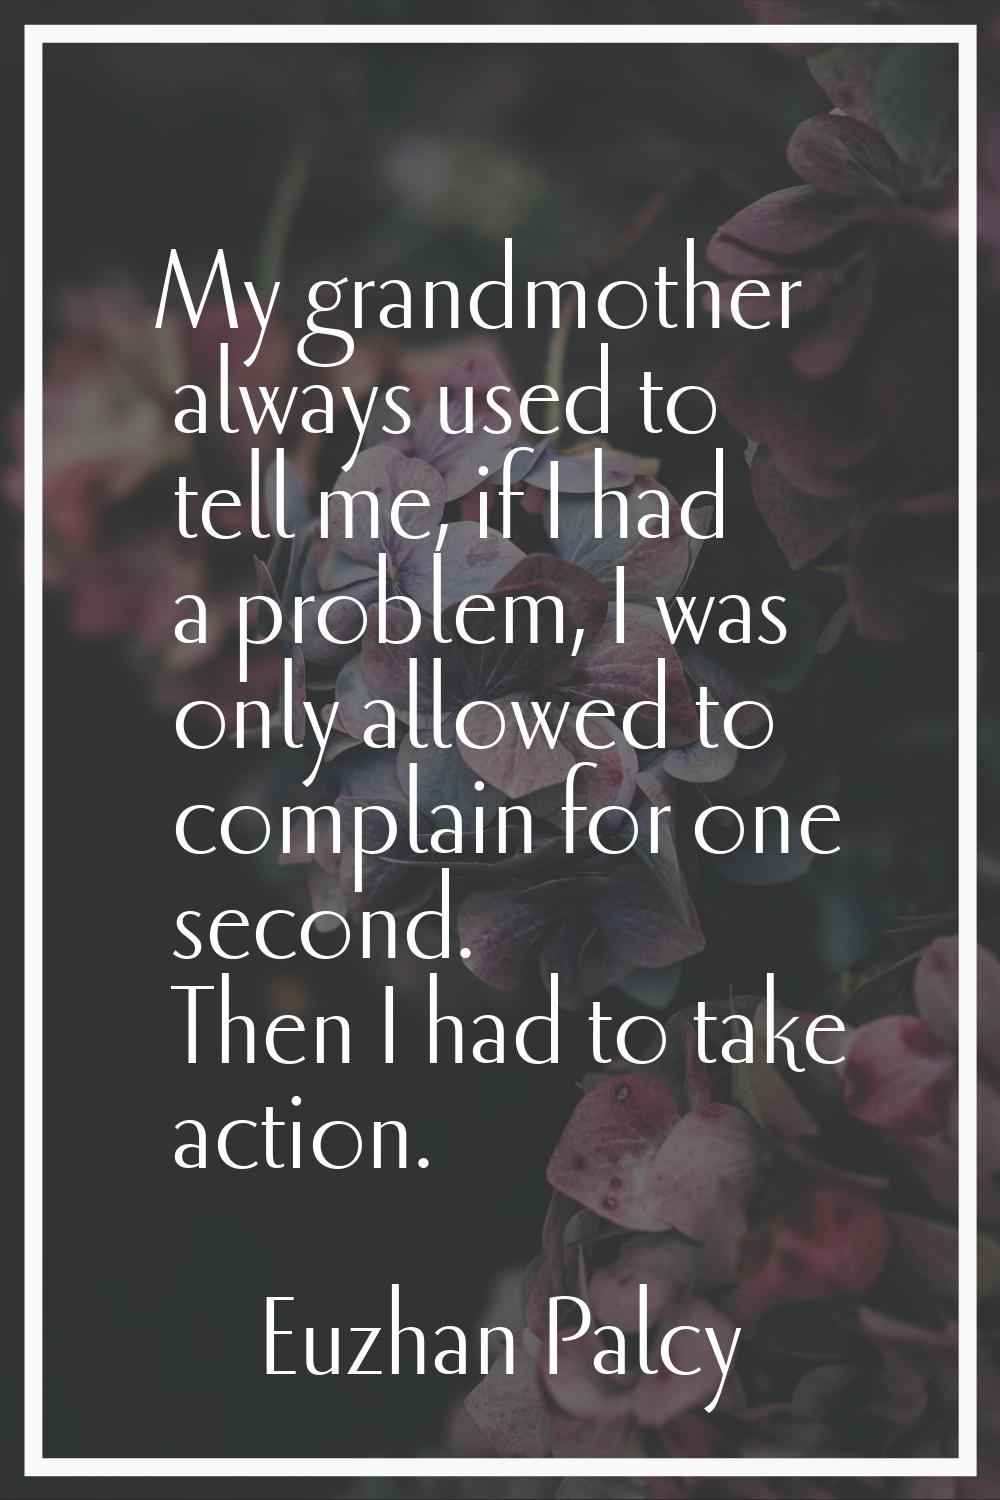 My grandmother always used to tell me, if I had a problem, I was only allowed to complain for one s